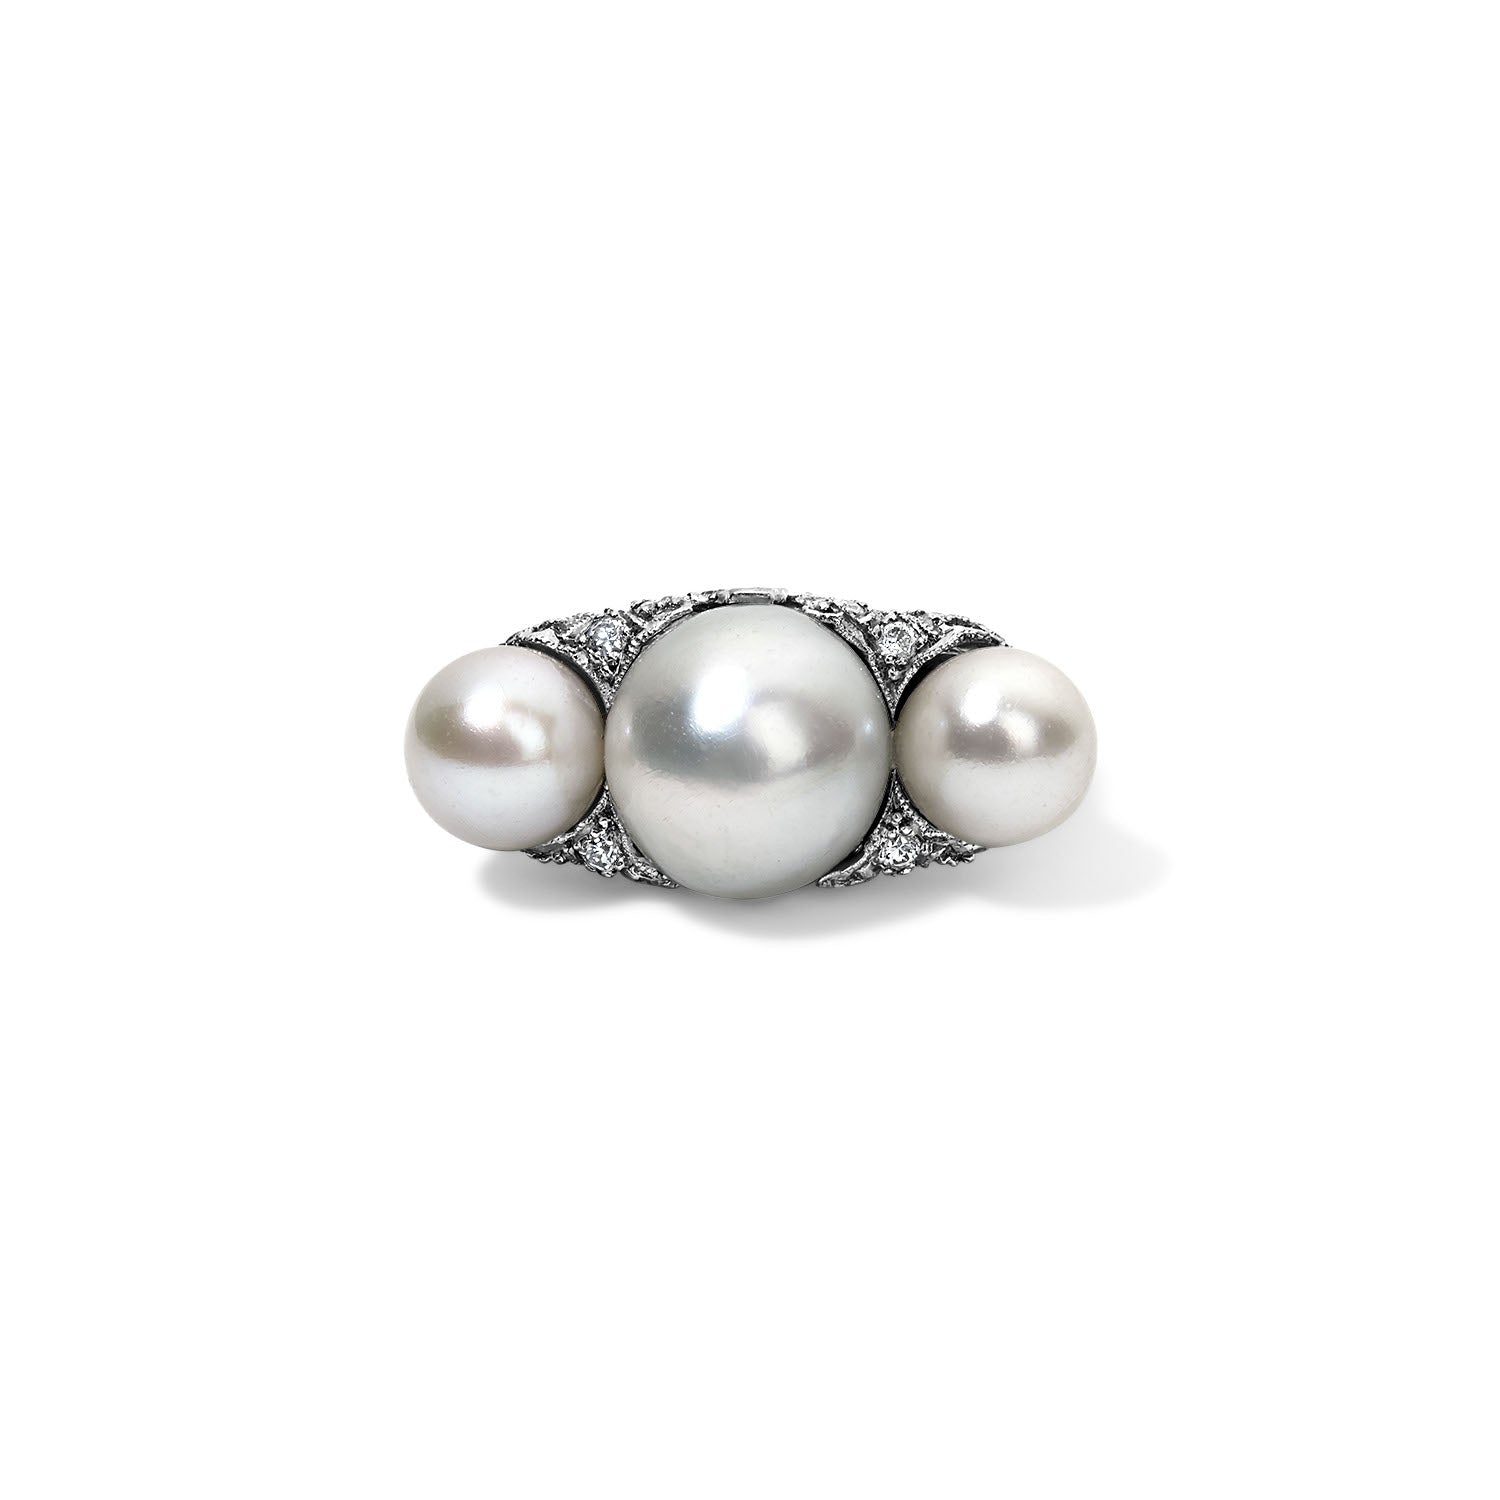 Antique Edwardian 3 Pearl Ring